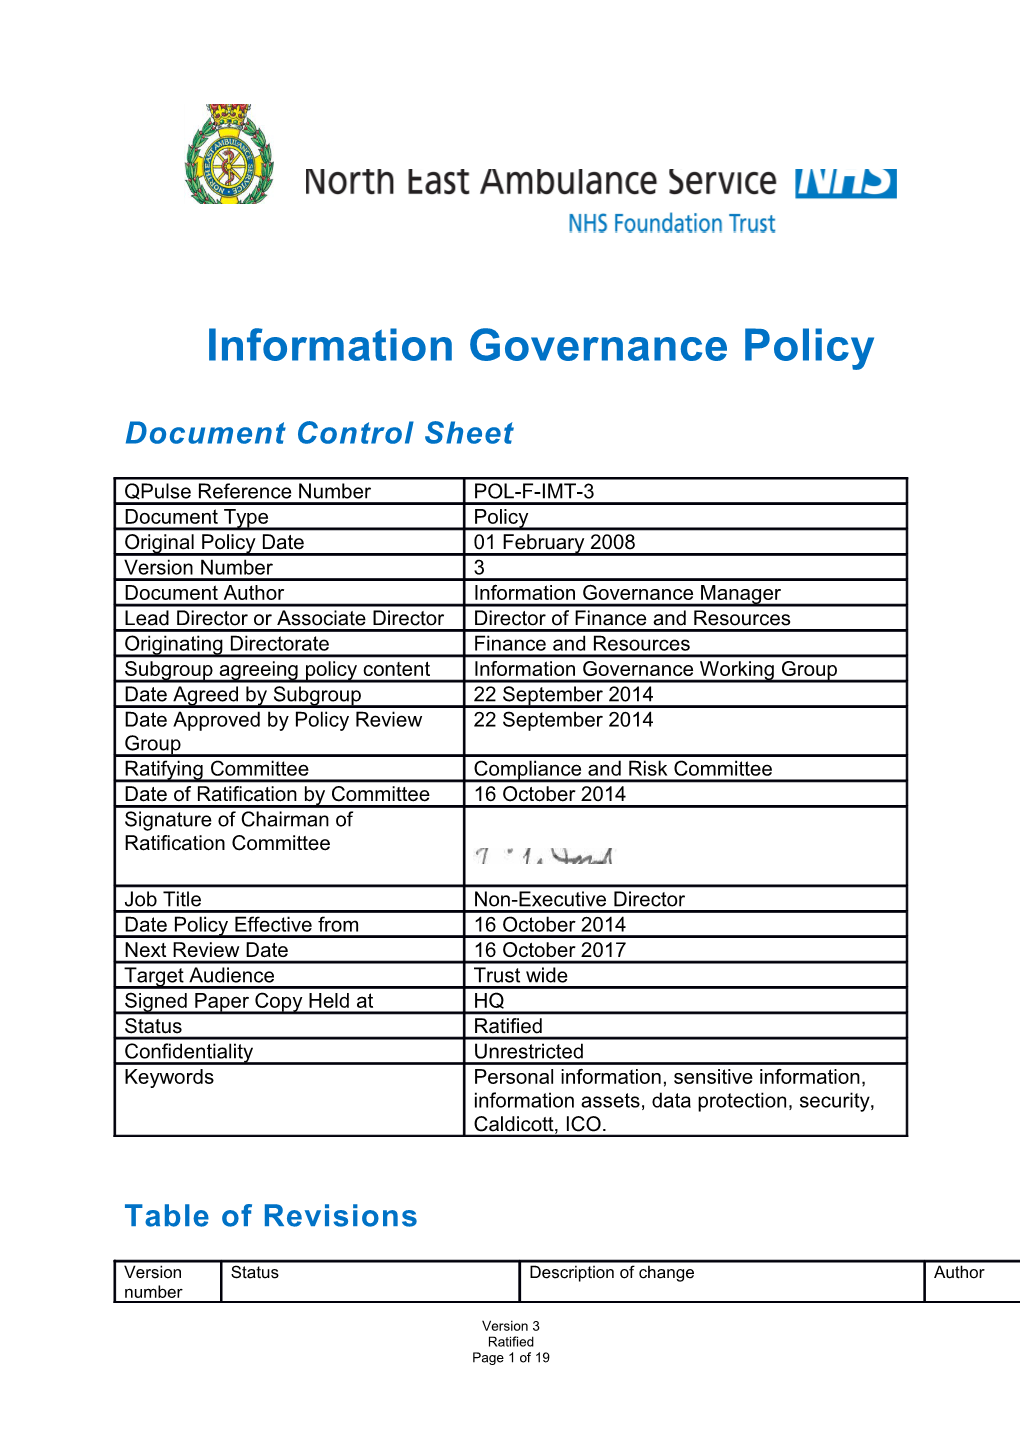 Informationgovernance Policy